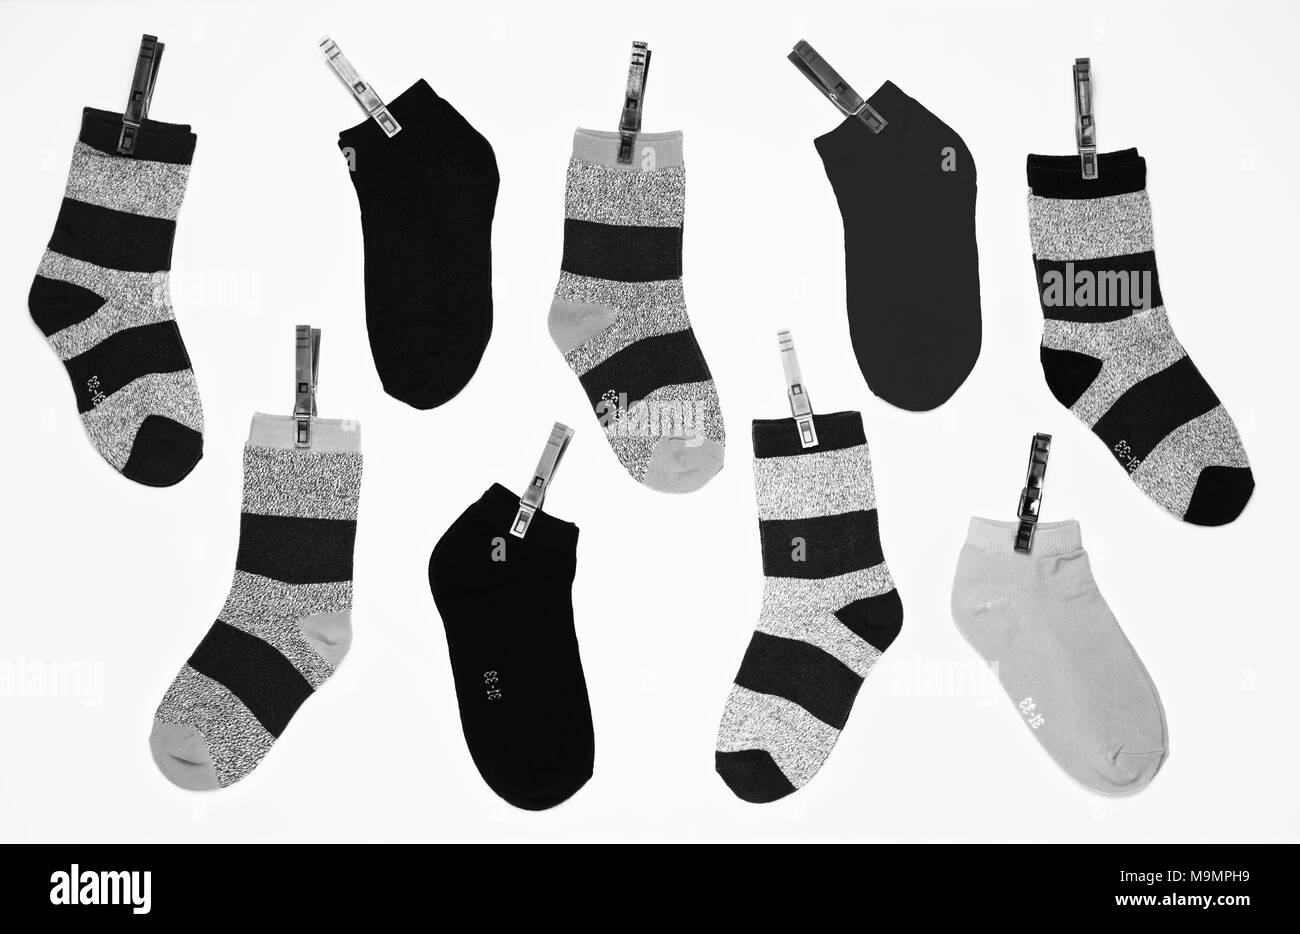 Black and white young boy socks pattern on white background Stock Photo